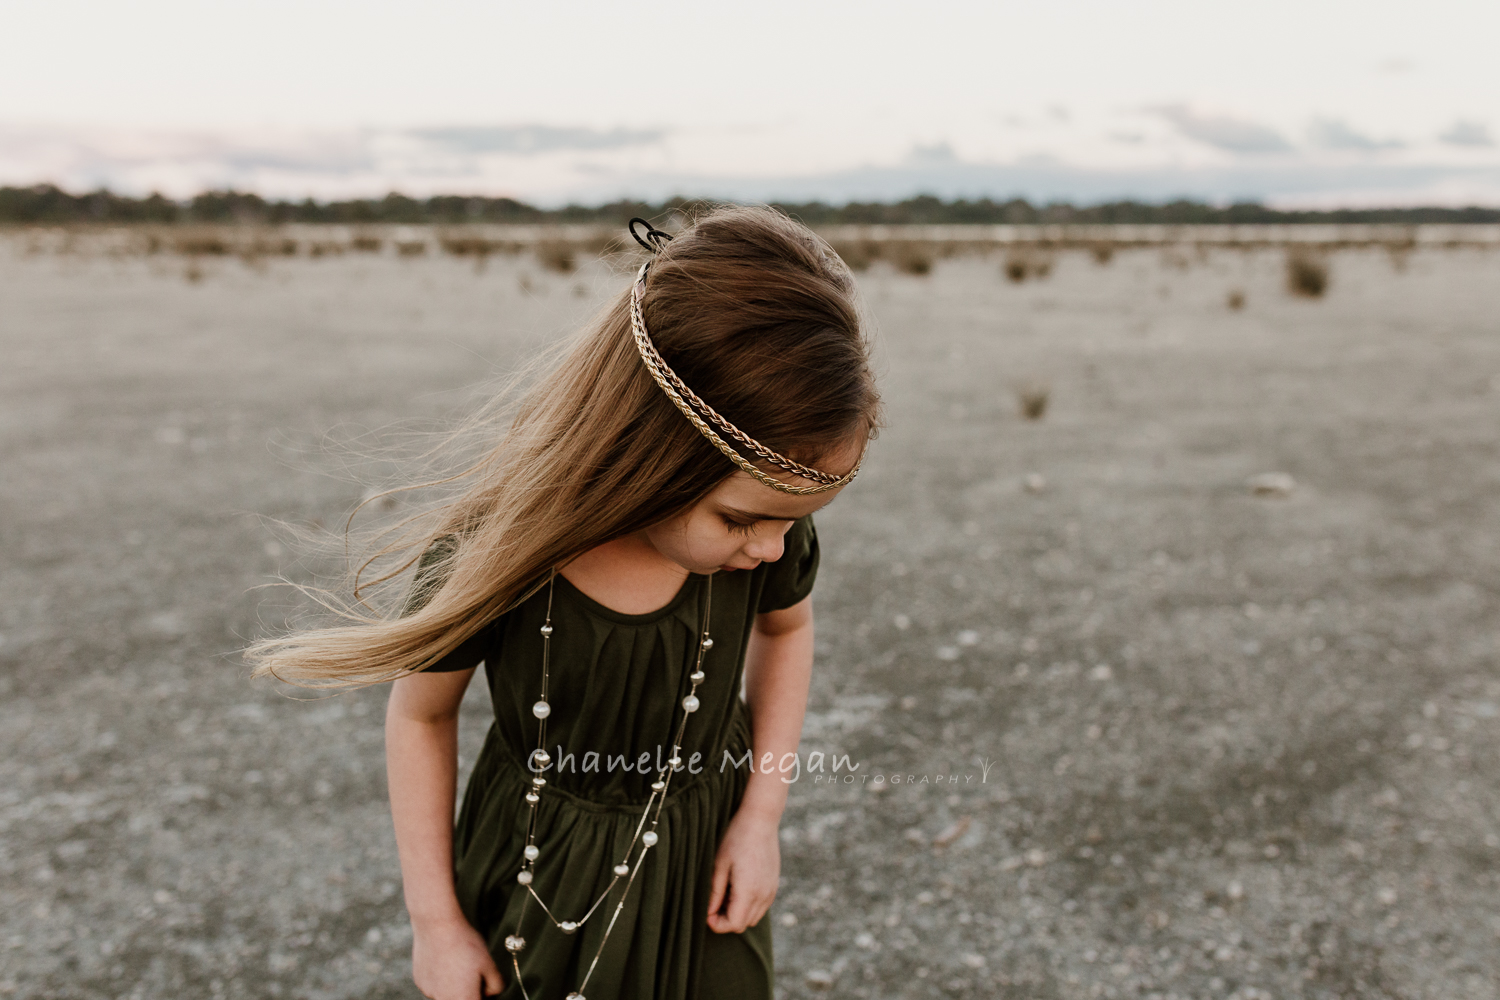 Natural and candid childhood photographs by Chanelle Megan Photography in Perth